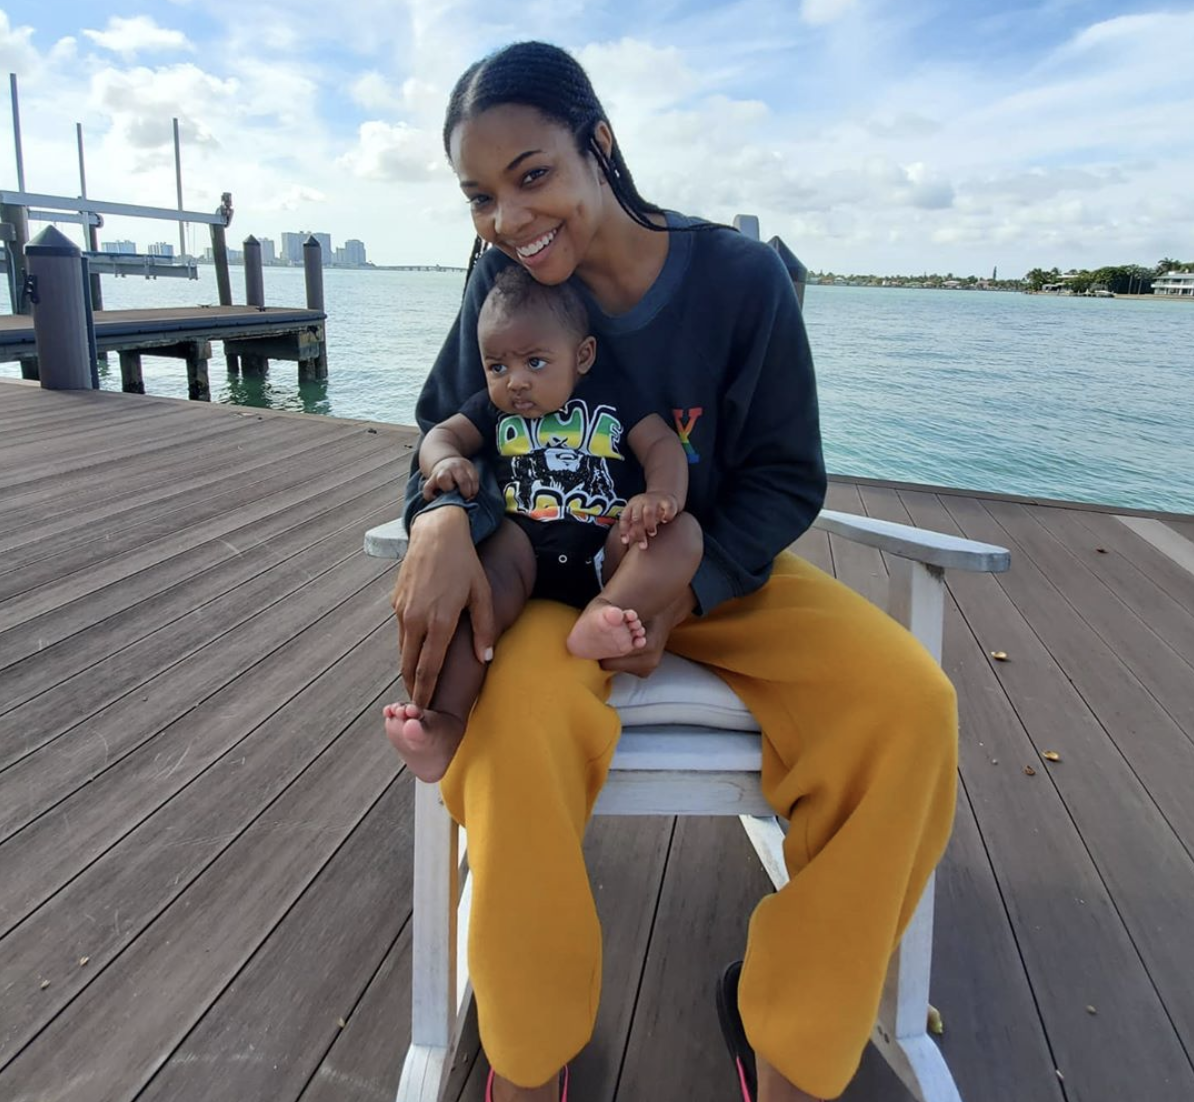 Gabrielle Union Tries Fruit Snack Challenge On Daughter Kaavia